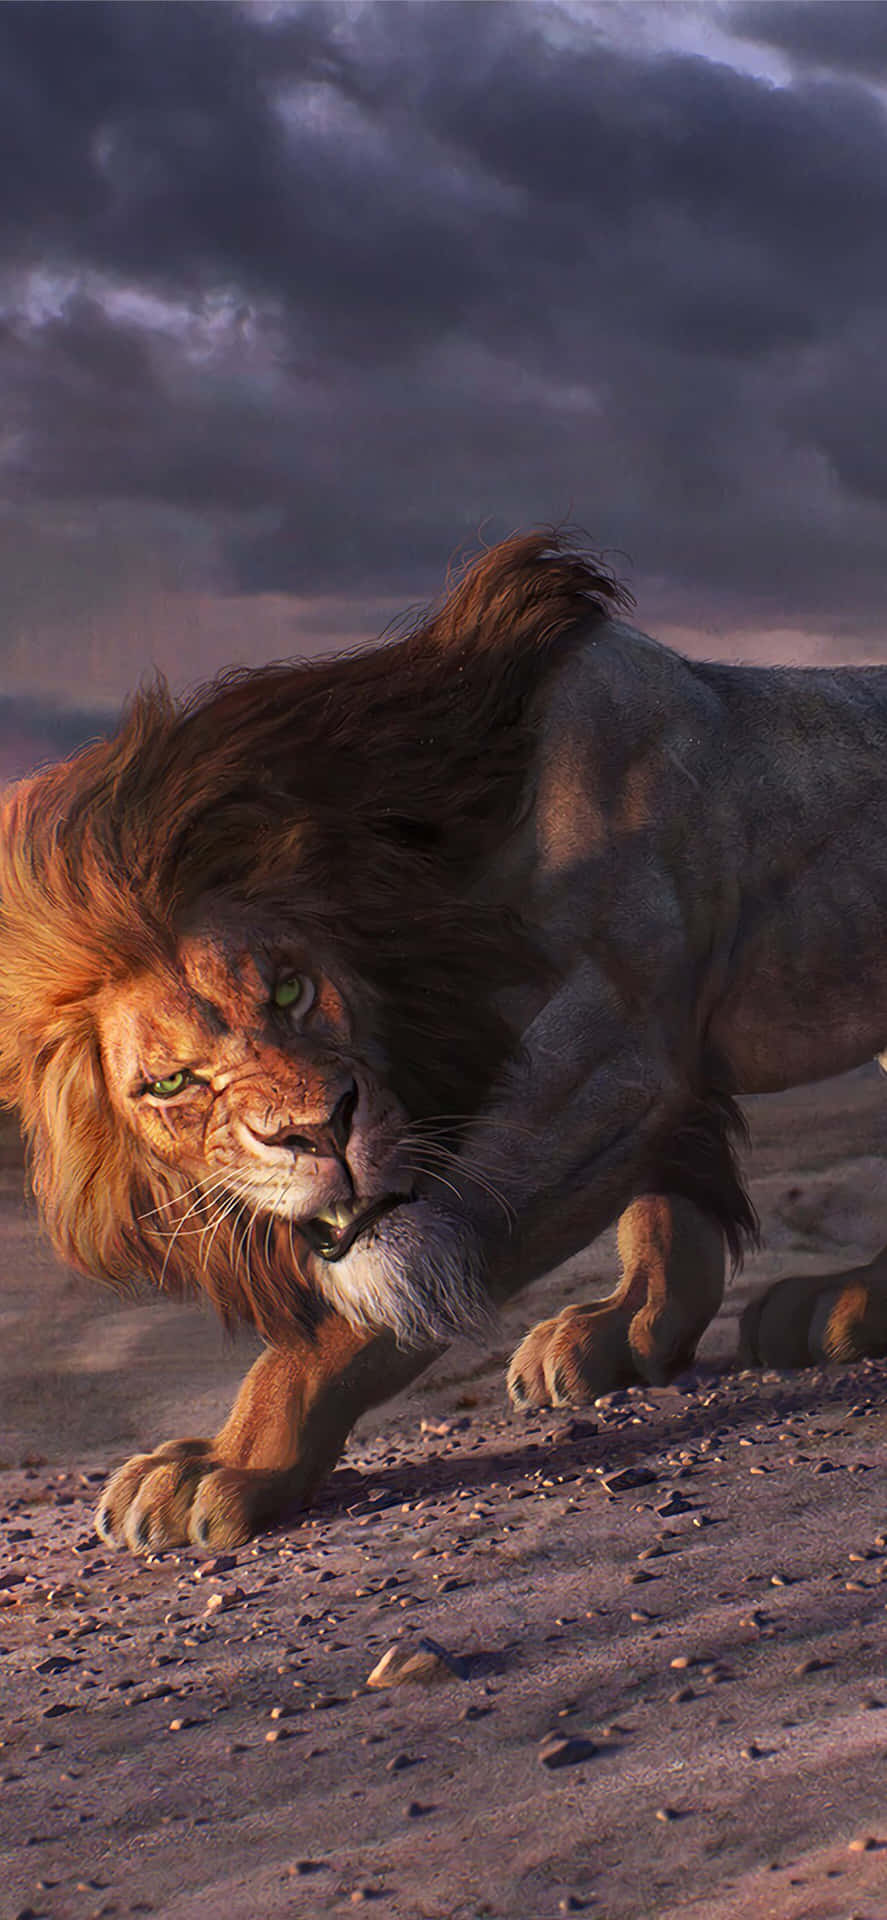 "The majestic beauty of a lion"